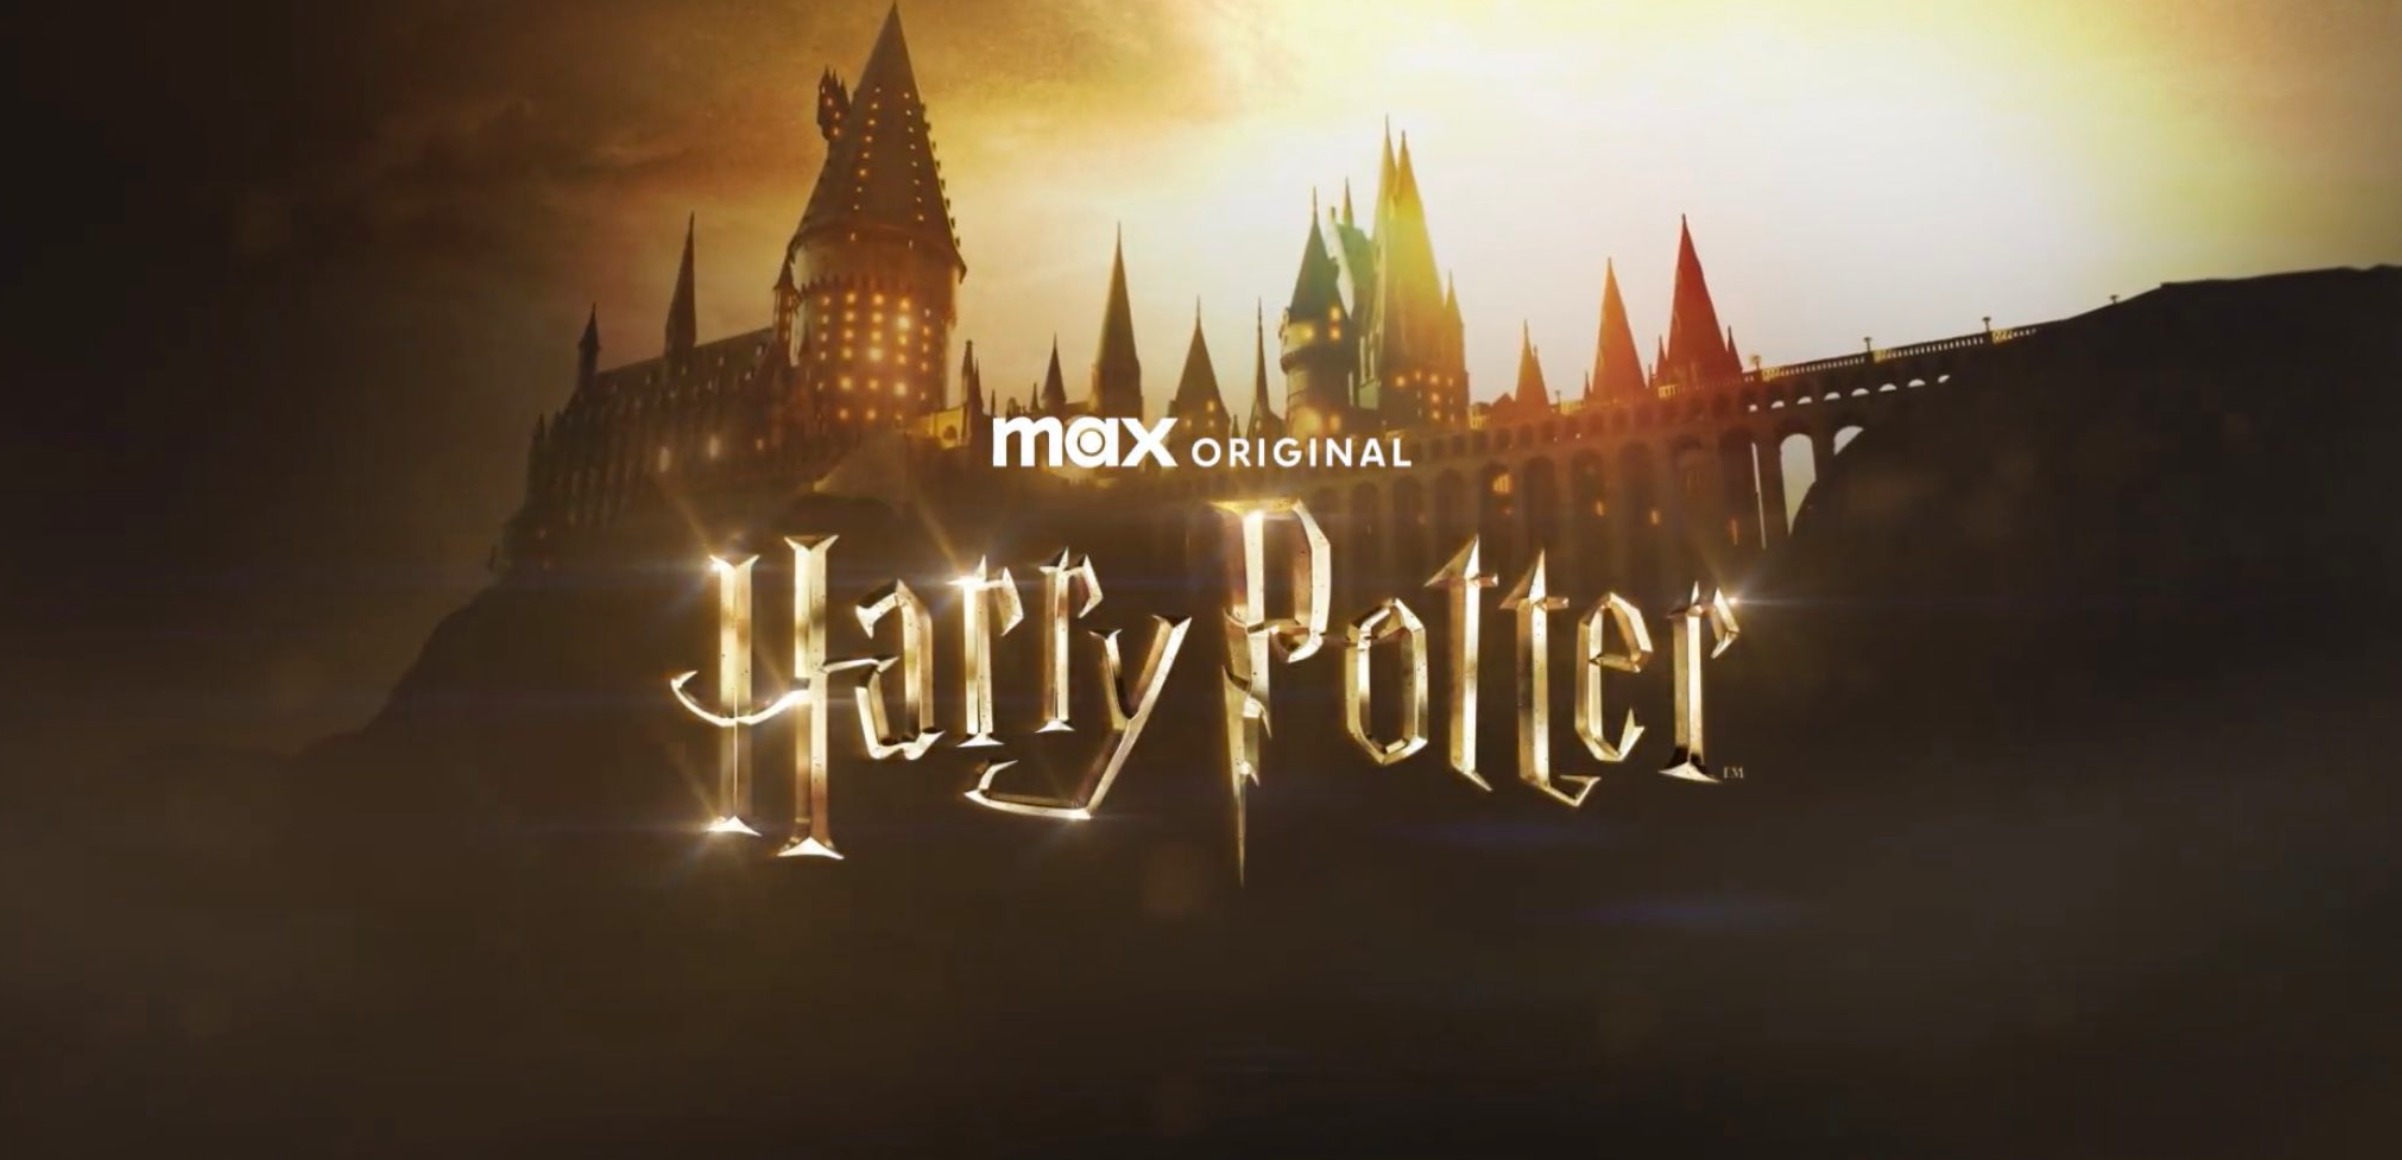 HBO Max Announces Harry Potter Series Release Window The Movie Blog